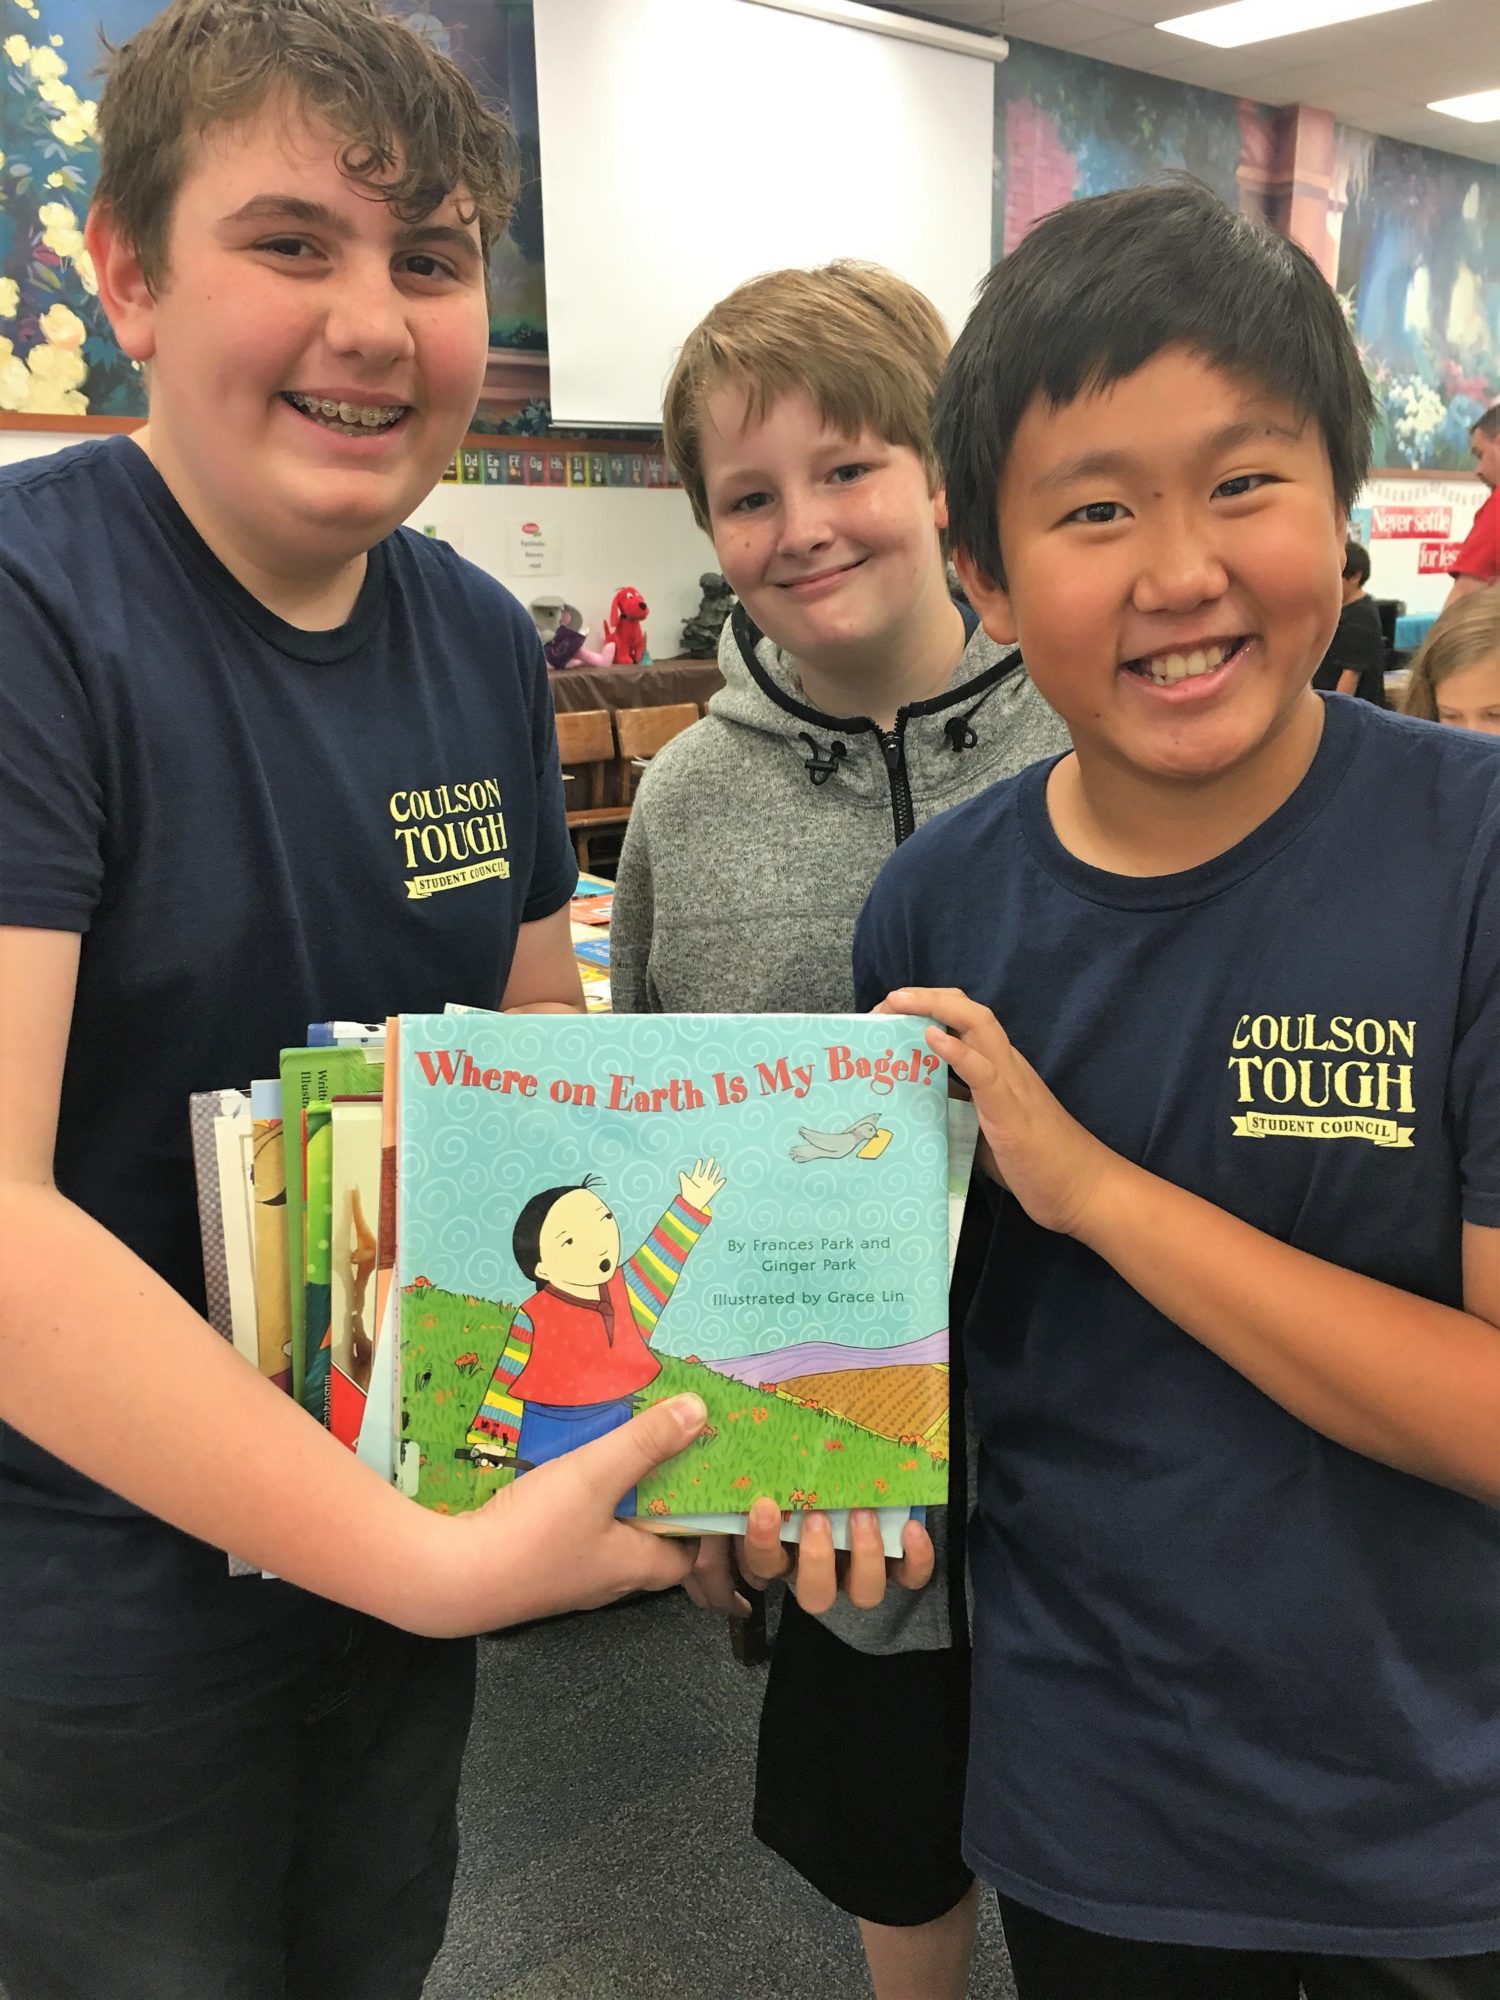 group of boys hold up a book